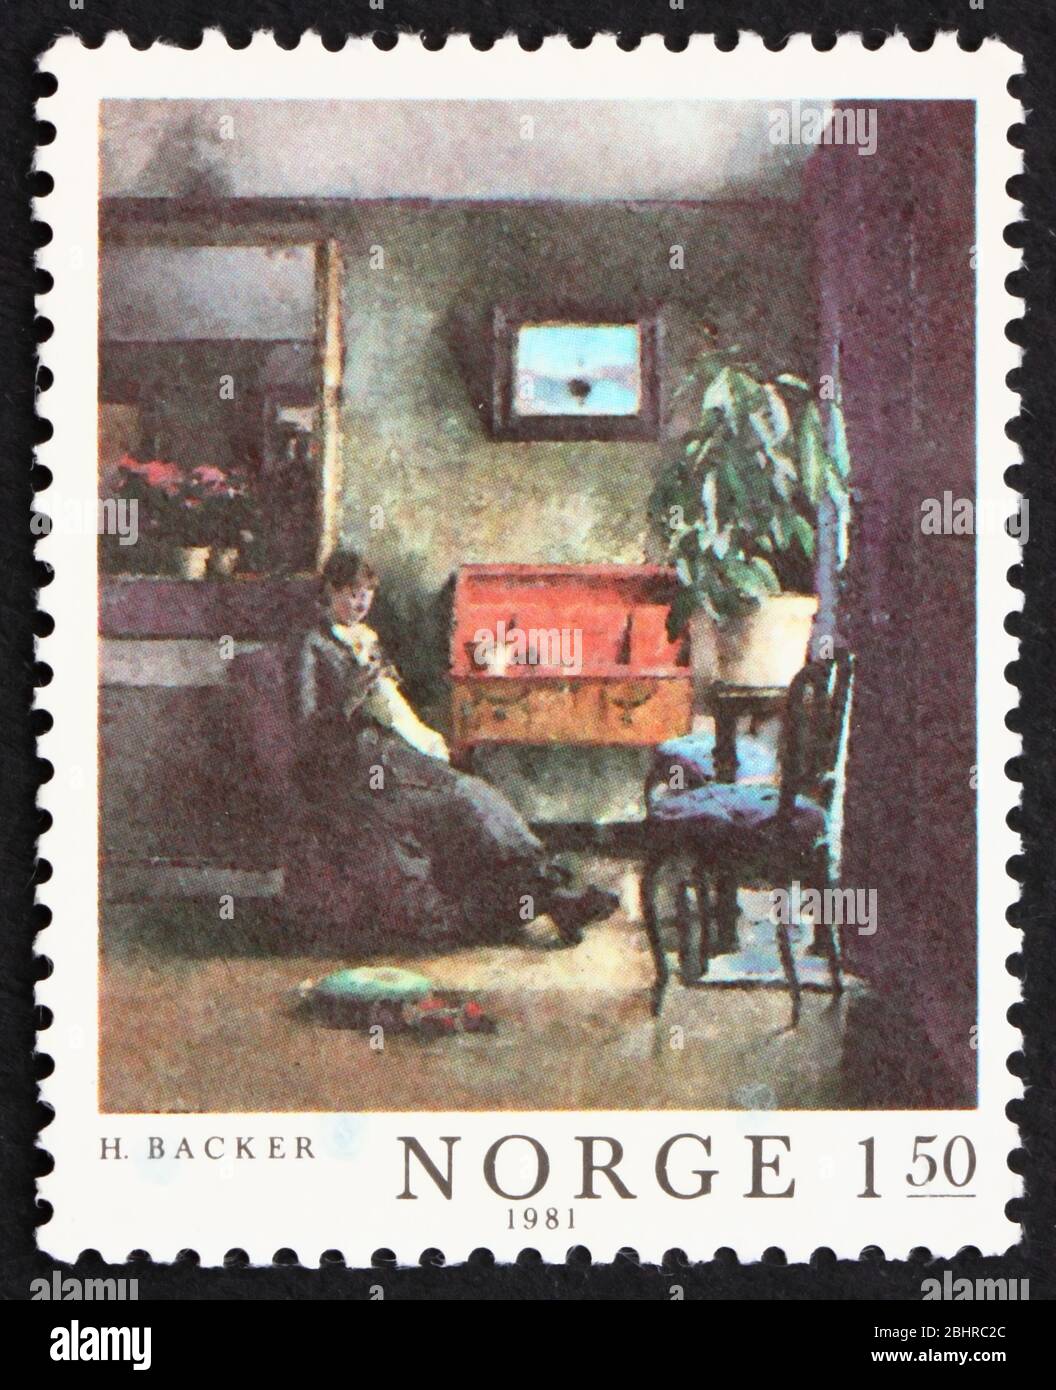 NORWAY - CIRCA 1981: a stamp printed in the Norway shows Interior in Blue, Painting by Harriet Backer, circa 1981 Stock Photo